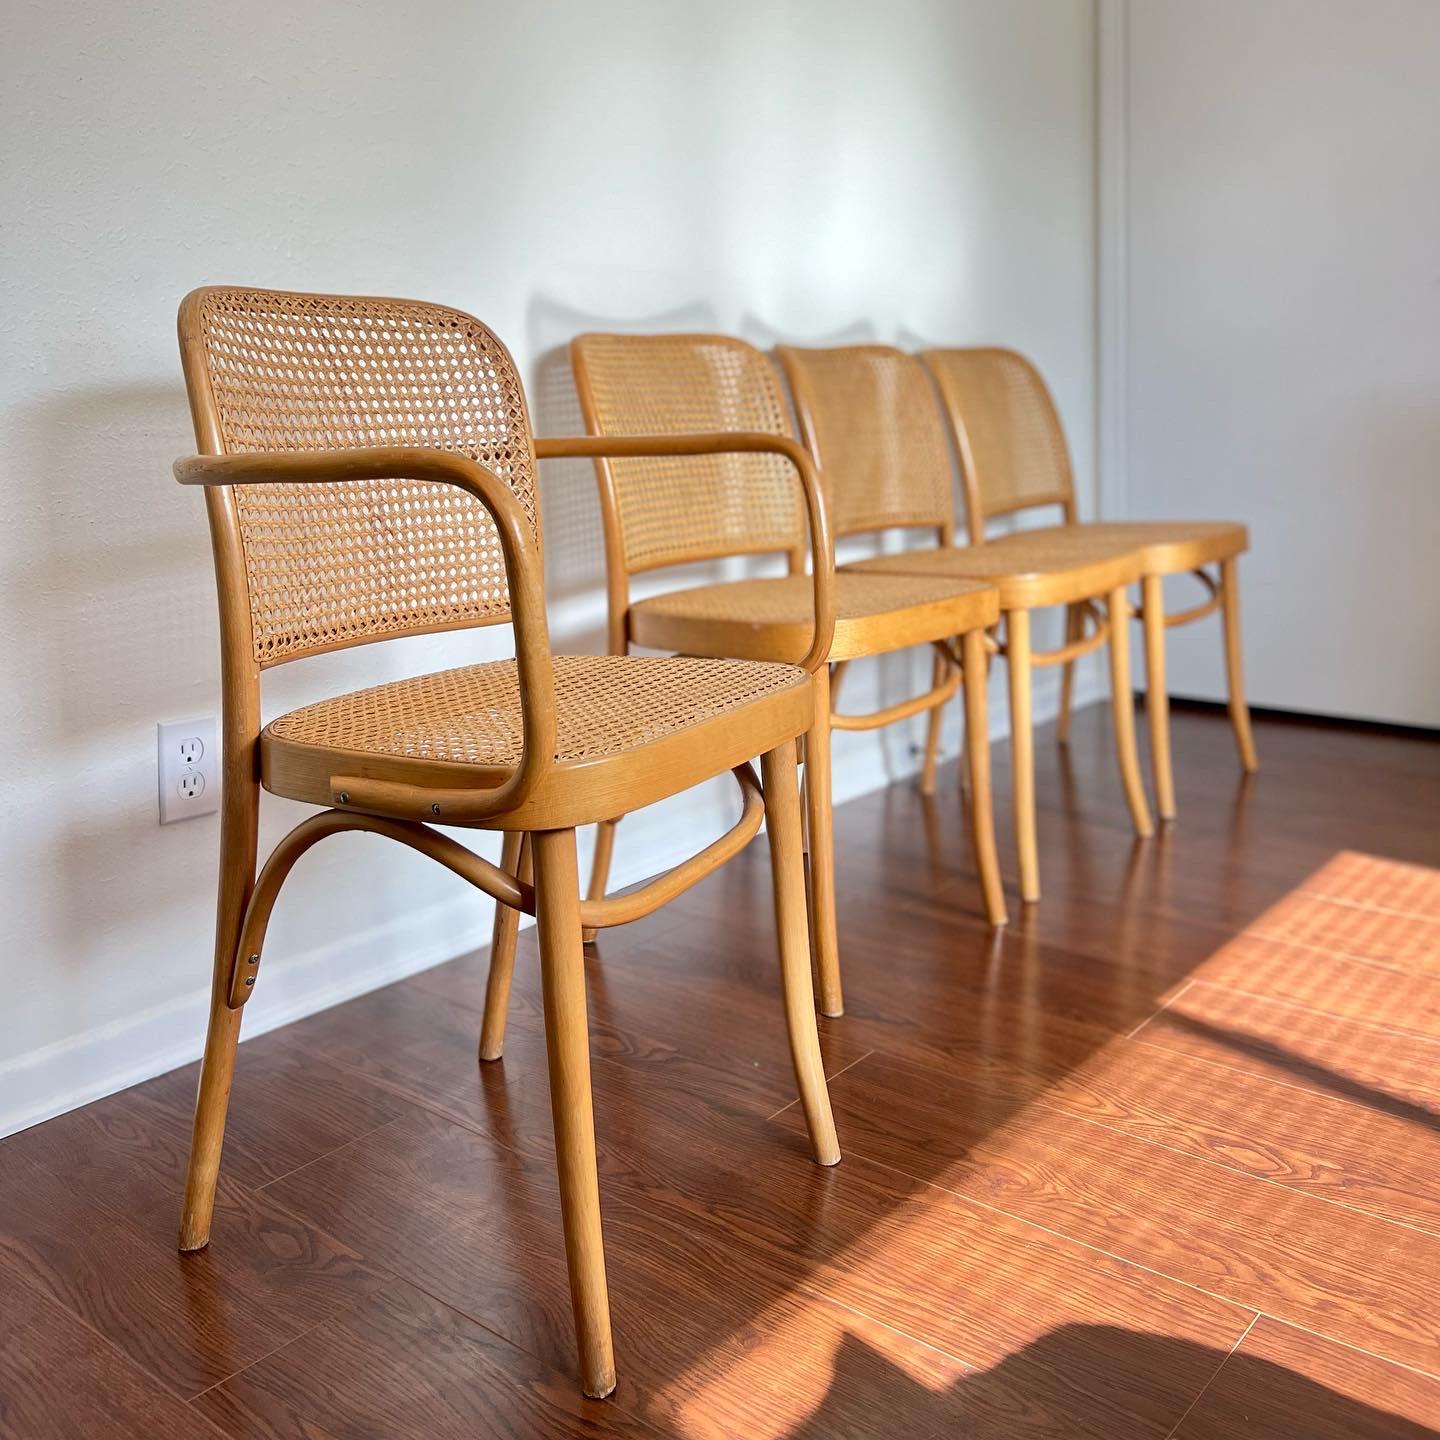 Set of 4 Josef Hoffmann Bentwood and Cane Chairs, Made in Poland 2